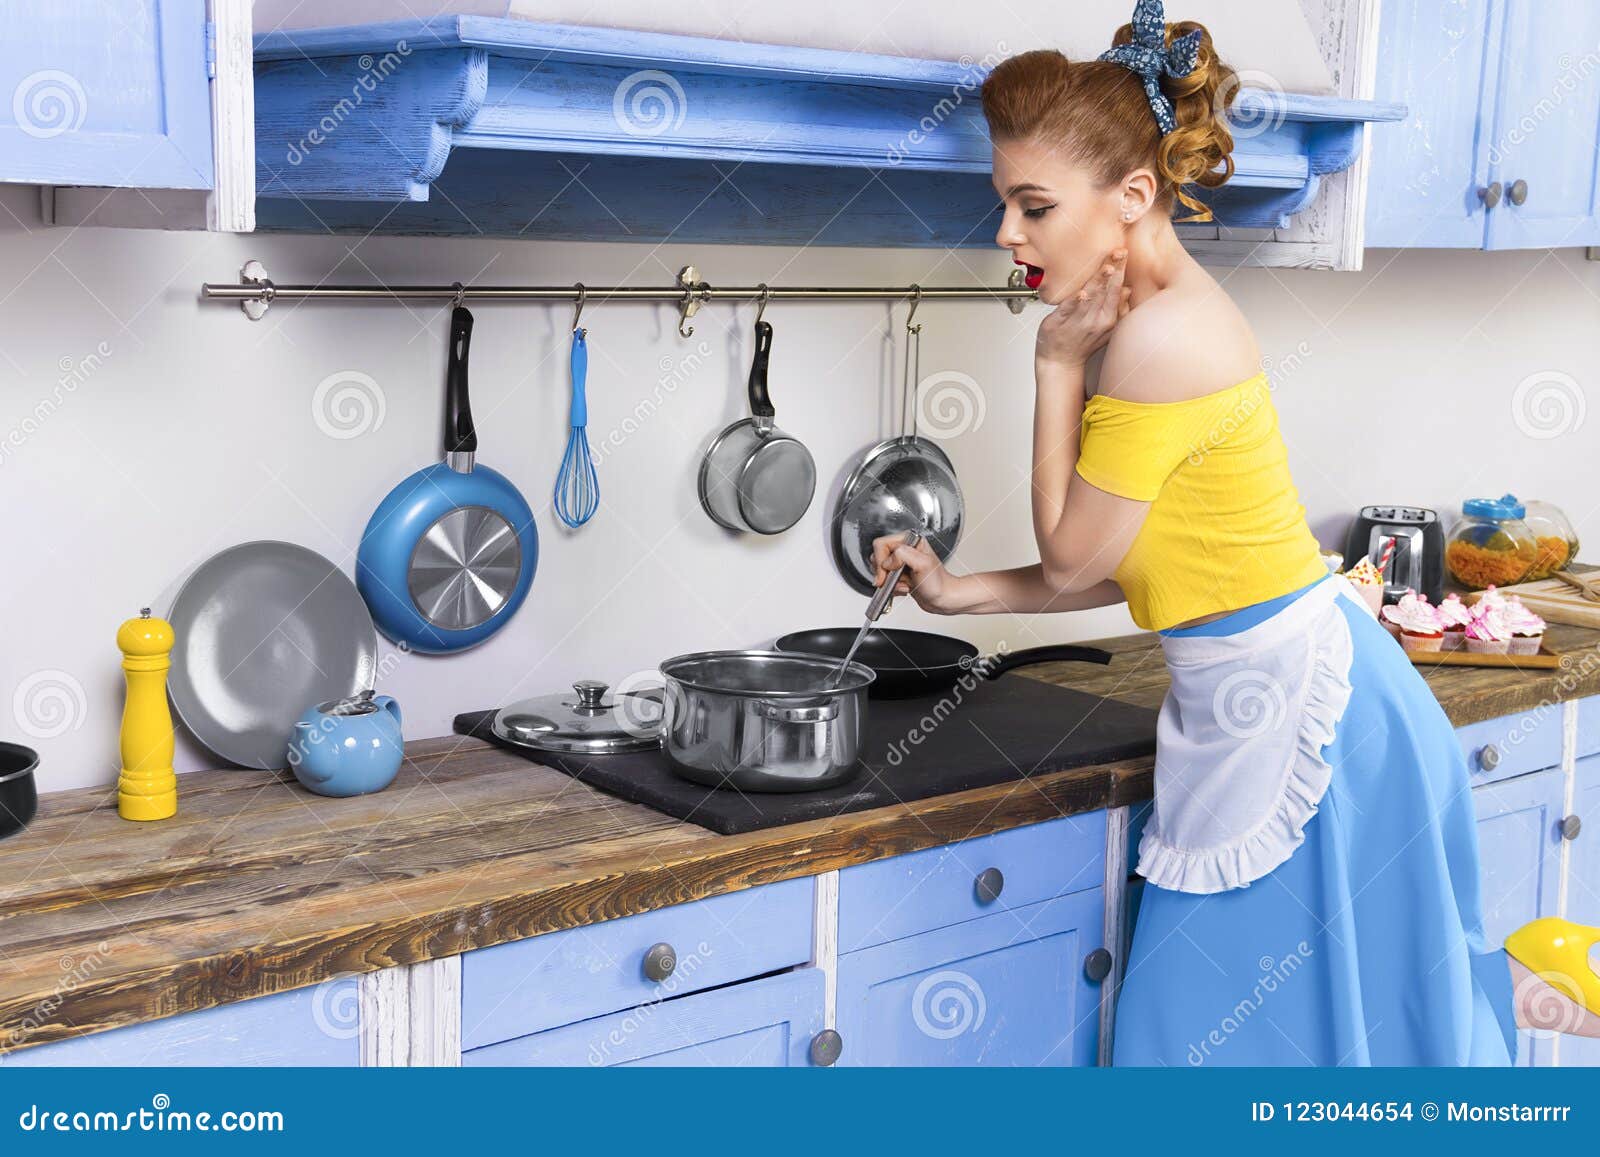 Pin on Cooking with Gas